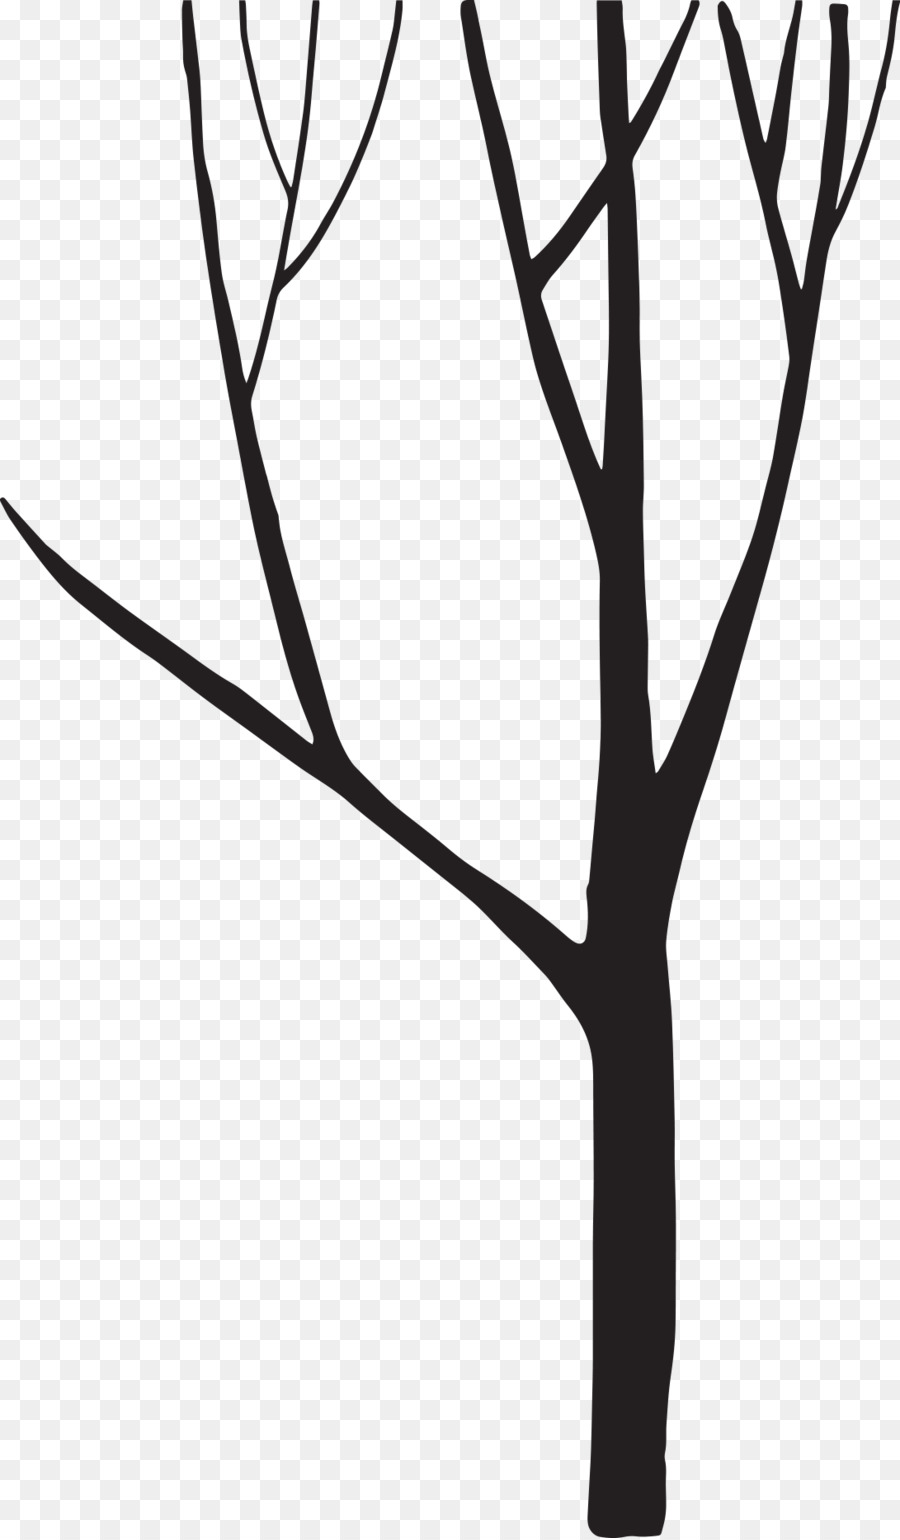 Black and white Silhouette Tree - Tree Silhouette png download - 1091*1865 - Free Transparent Black And White png Download.